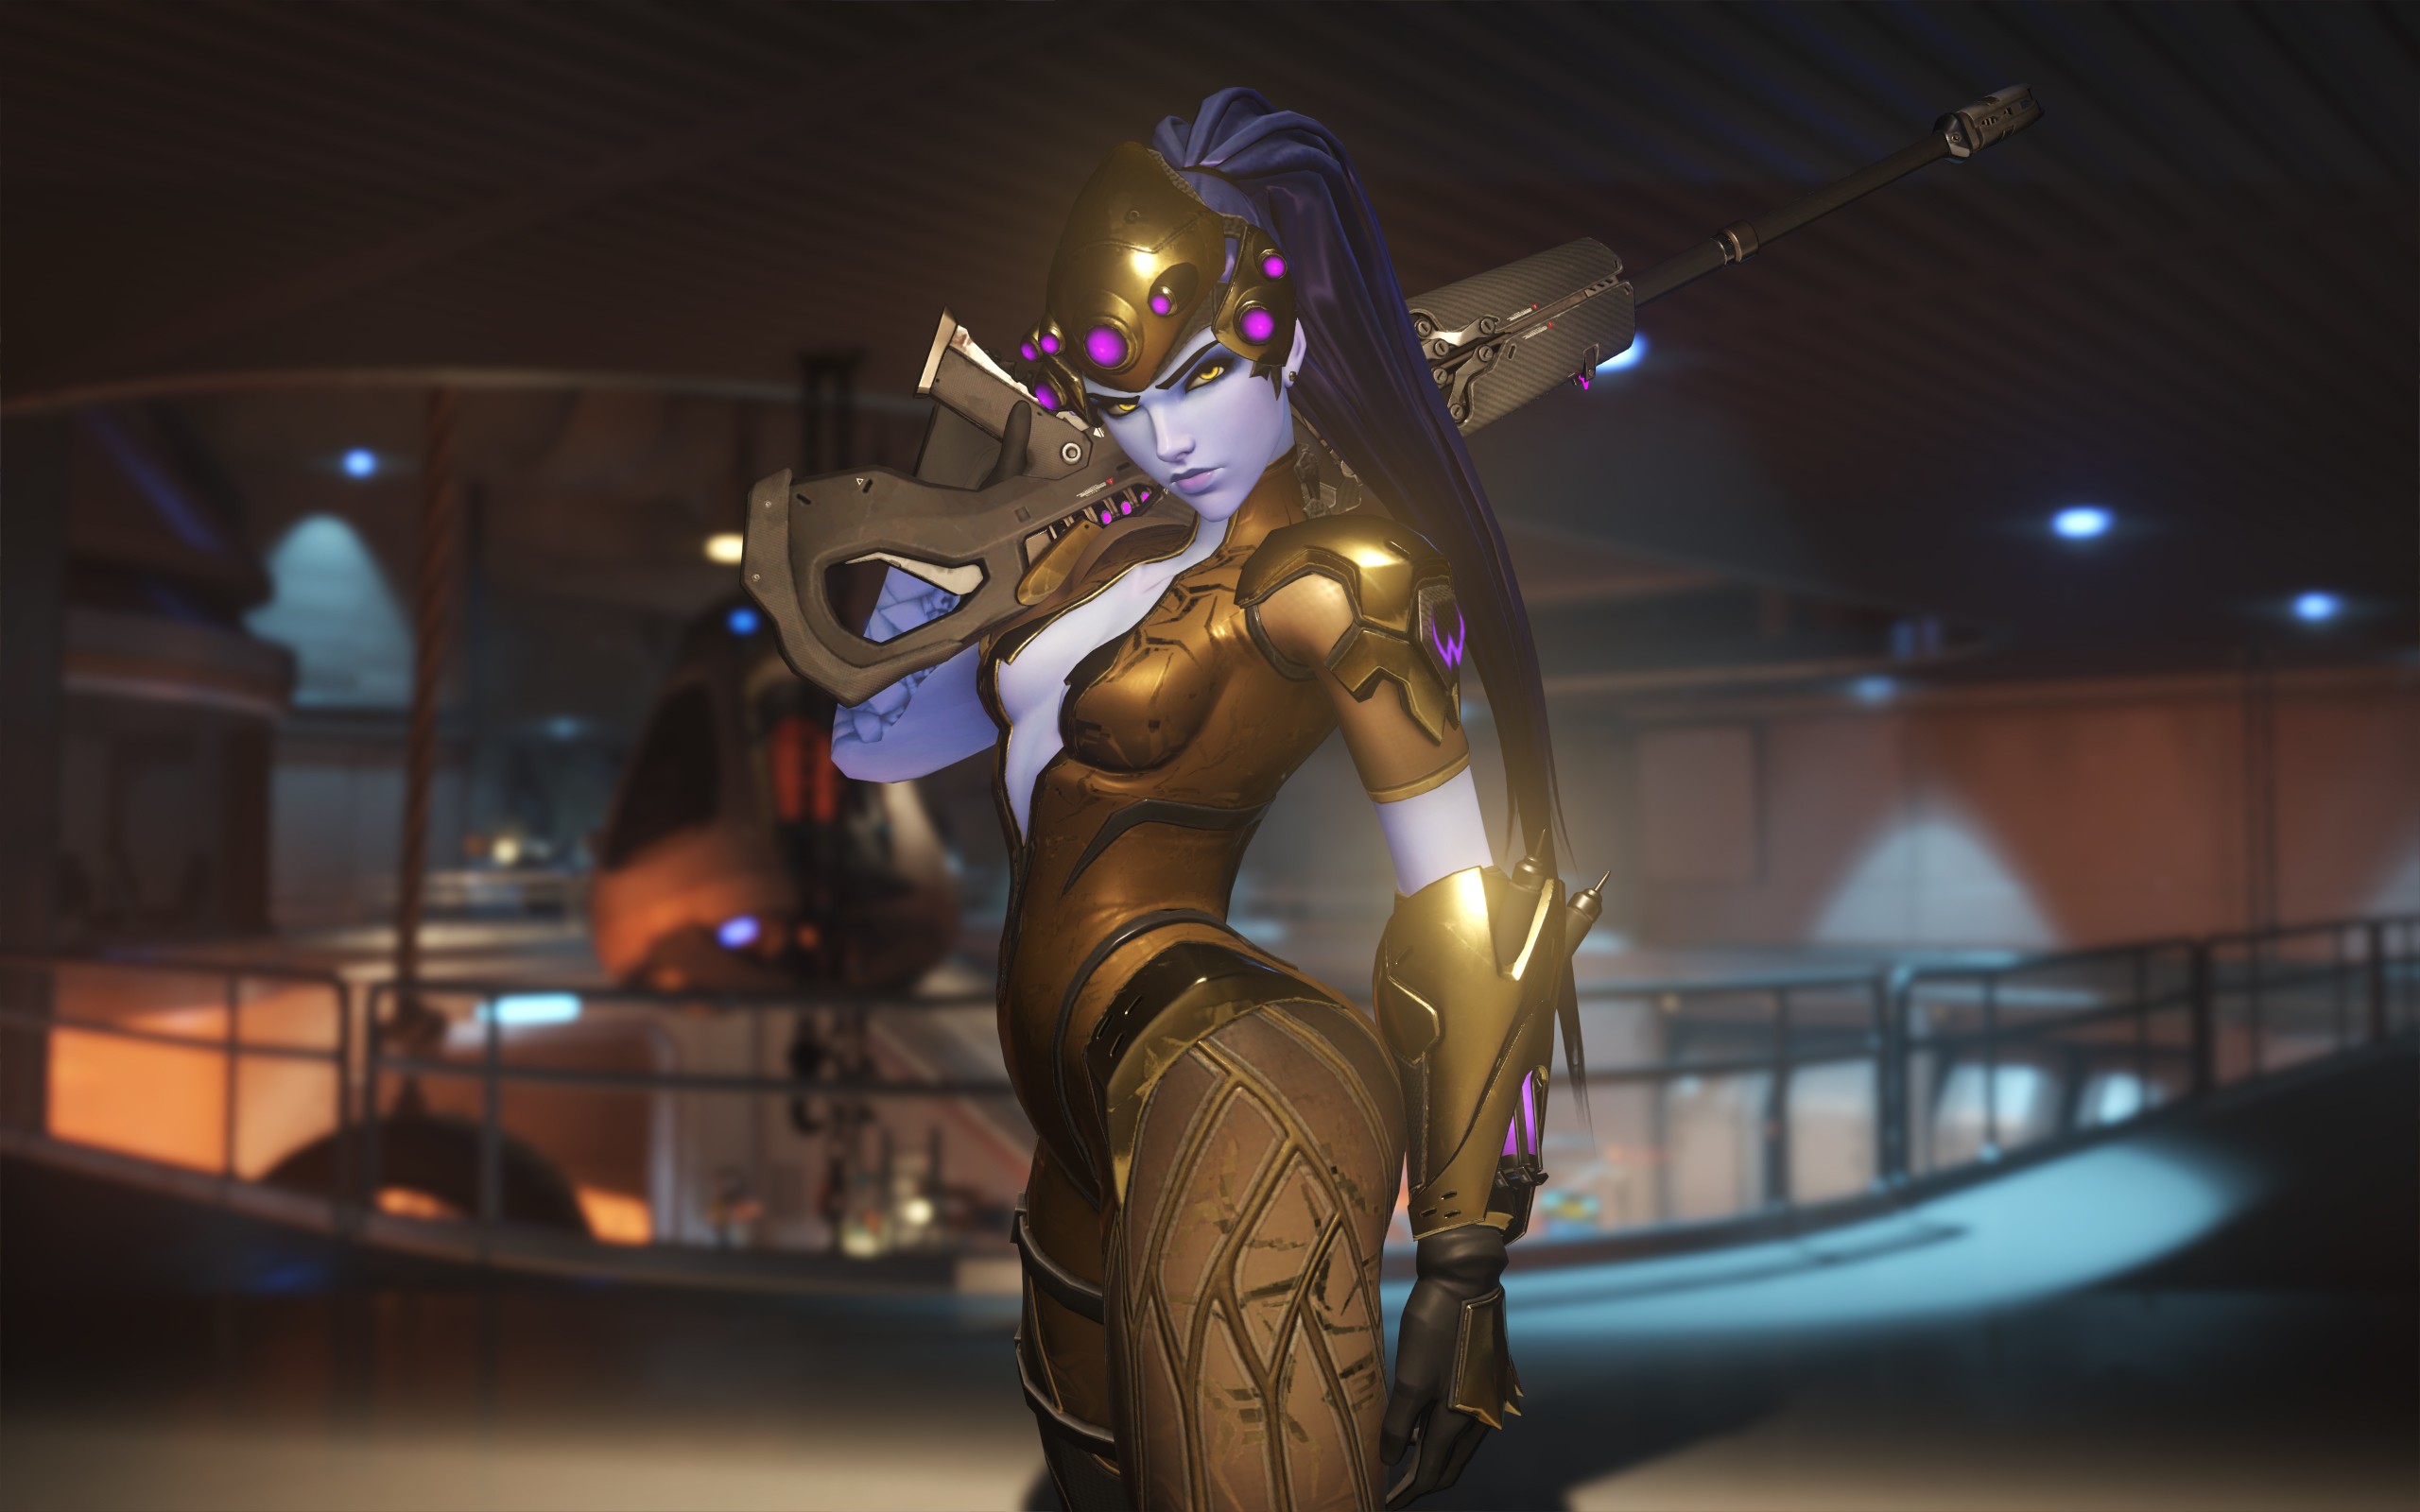 General 2560x1600 Overwatch Blizzard Entertainment Affiliation: Talon Widowmaker (Overwatch) video game characters girls with guns PC gaming video game girls long hair yellow eyes